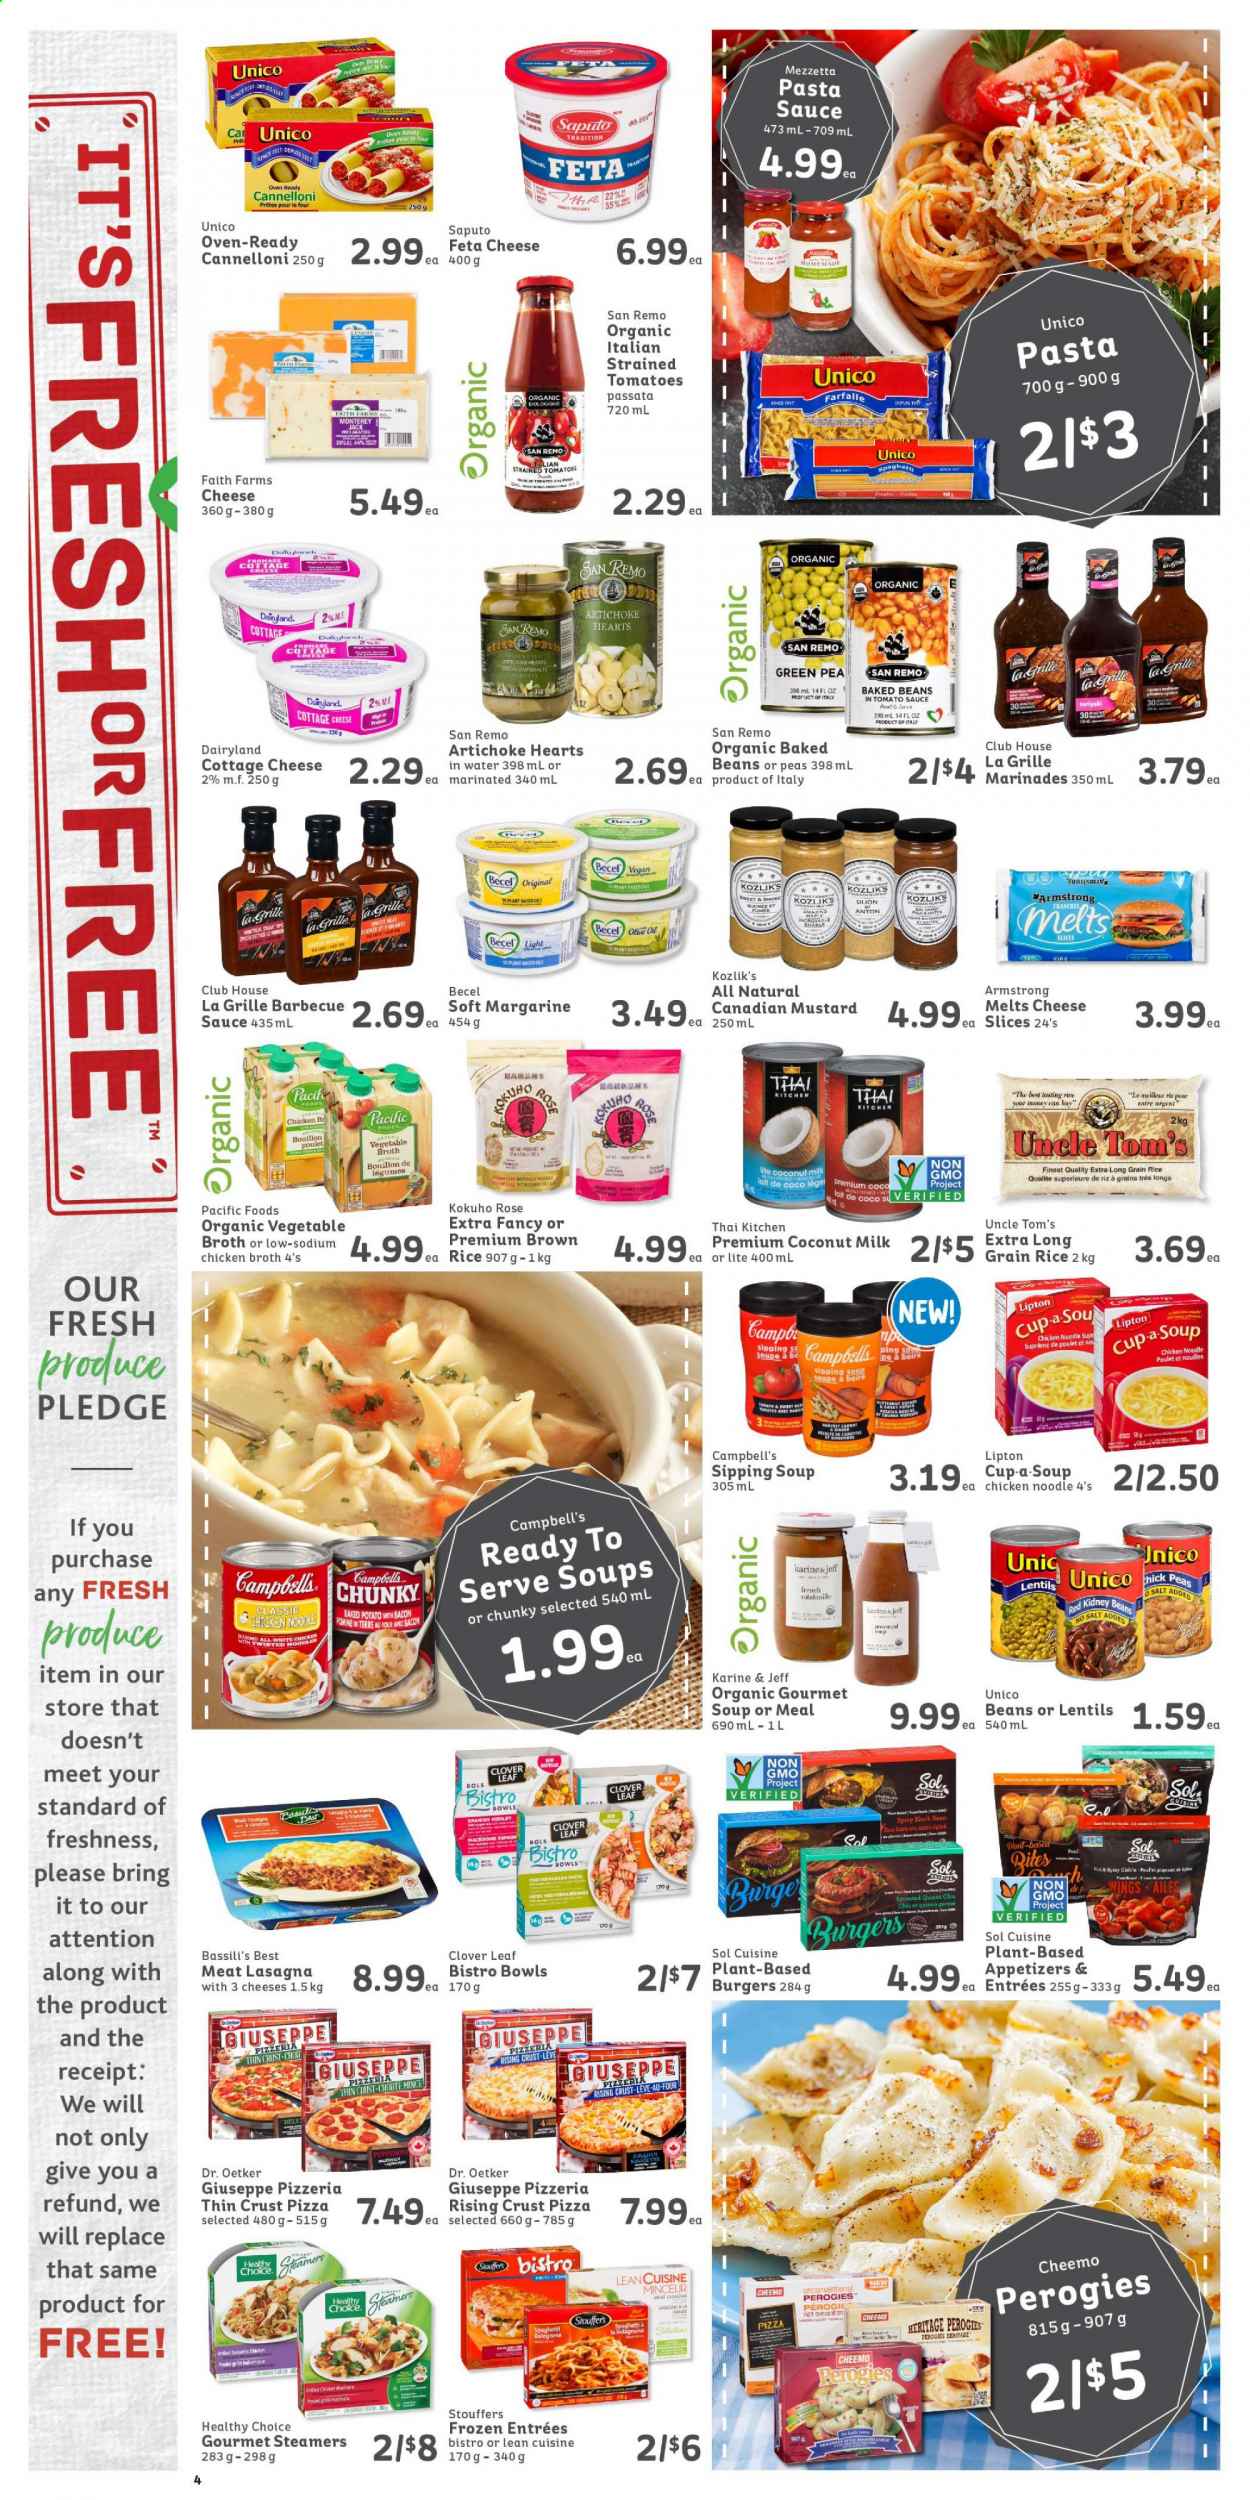 thumbnail - IGA Simple Goodness Flyer - January 01, 2021 - January 07, 2021 - Sales products - artichoke, beans, peas, Campbell's, spaghetti, pizza, pasta sauce, soup, hamburger, noodles, lasagna meal, Lean Cuisine, Healthy Choice, cottage cheese, Monterey Jack cheese, Dr. Oetker, feta, Clover, margarine, bouillon, chicken broth, salt, broth, coconut milk, lentils, kidney beans, baked beans, rice, long grain rice, BBQ sauce, mustard, rosé wine. Page 4.